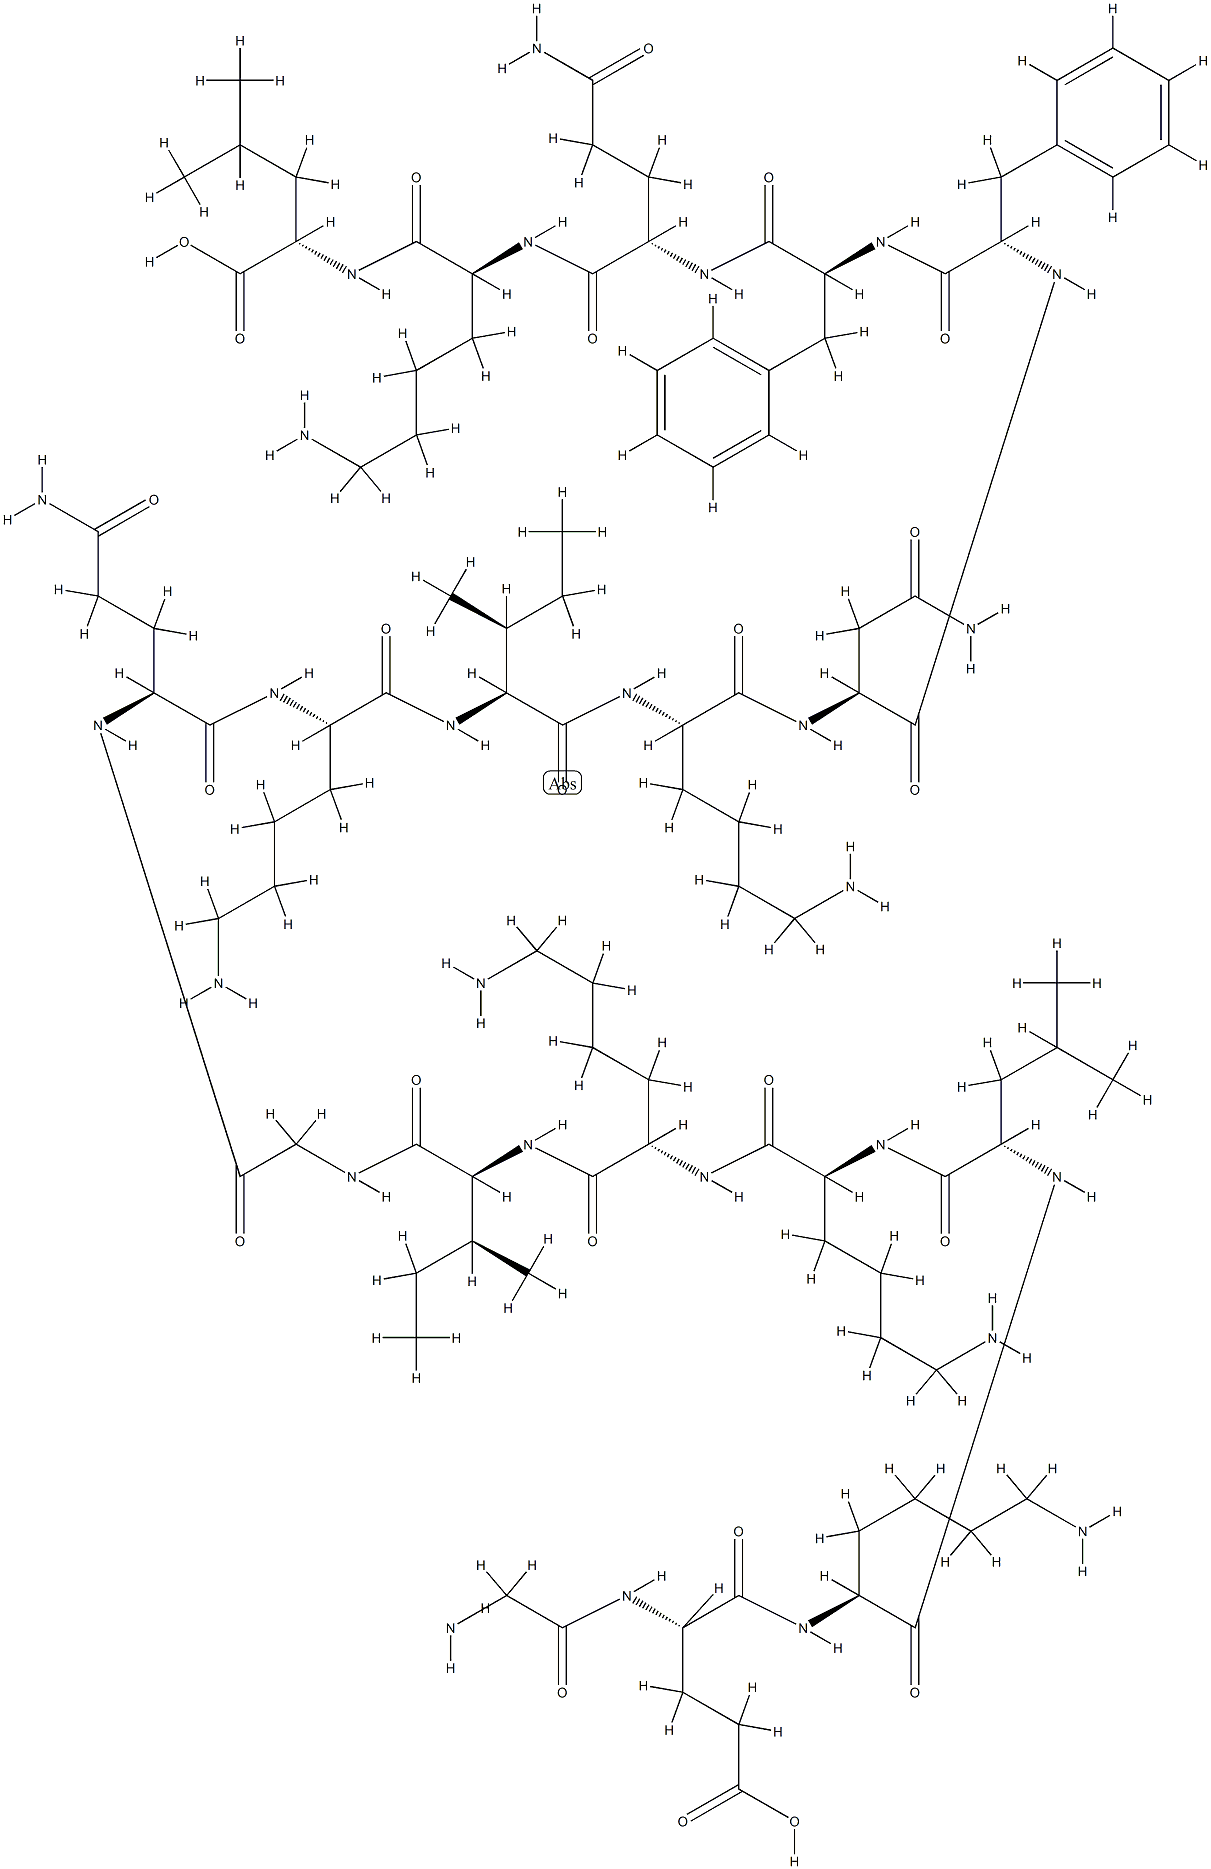 CRAMP-18 (mouse) Structure